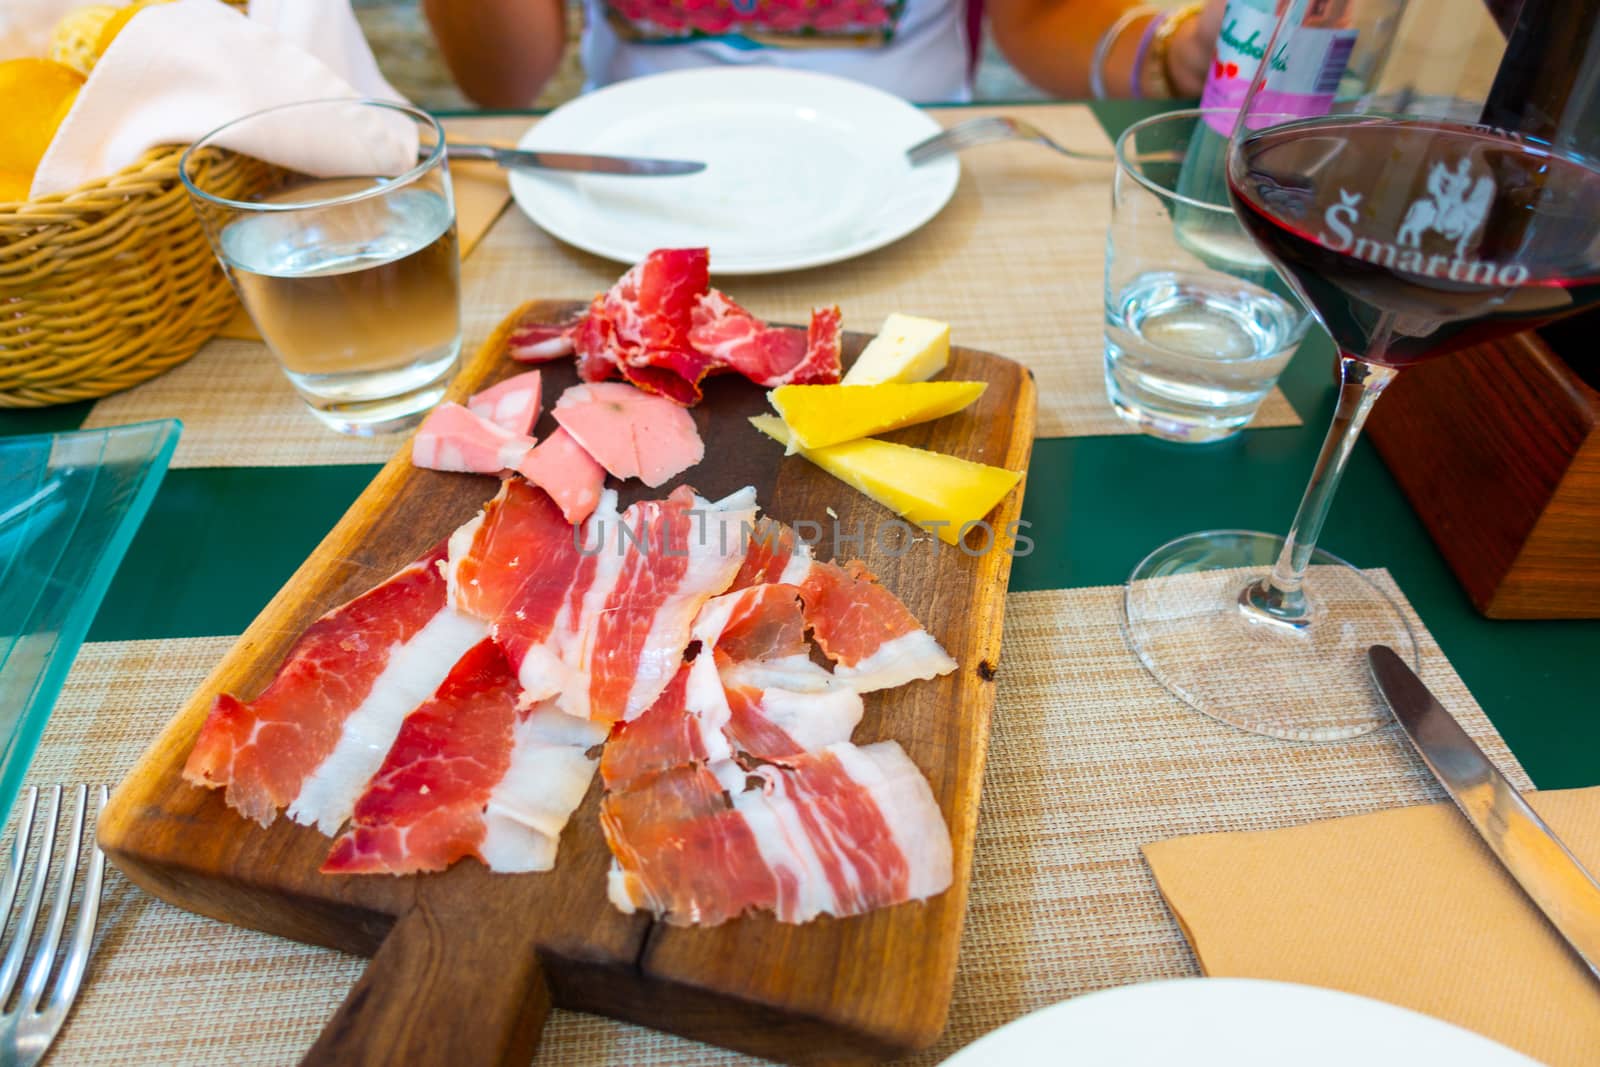 Italian style cold meat plate with cheese on wooden board with pancetta, Prosciutto, cheese and mortadella with glass of red wine, plate and cutlery